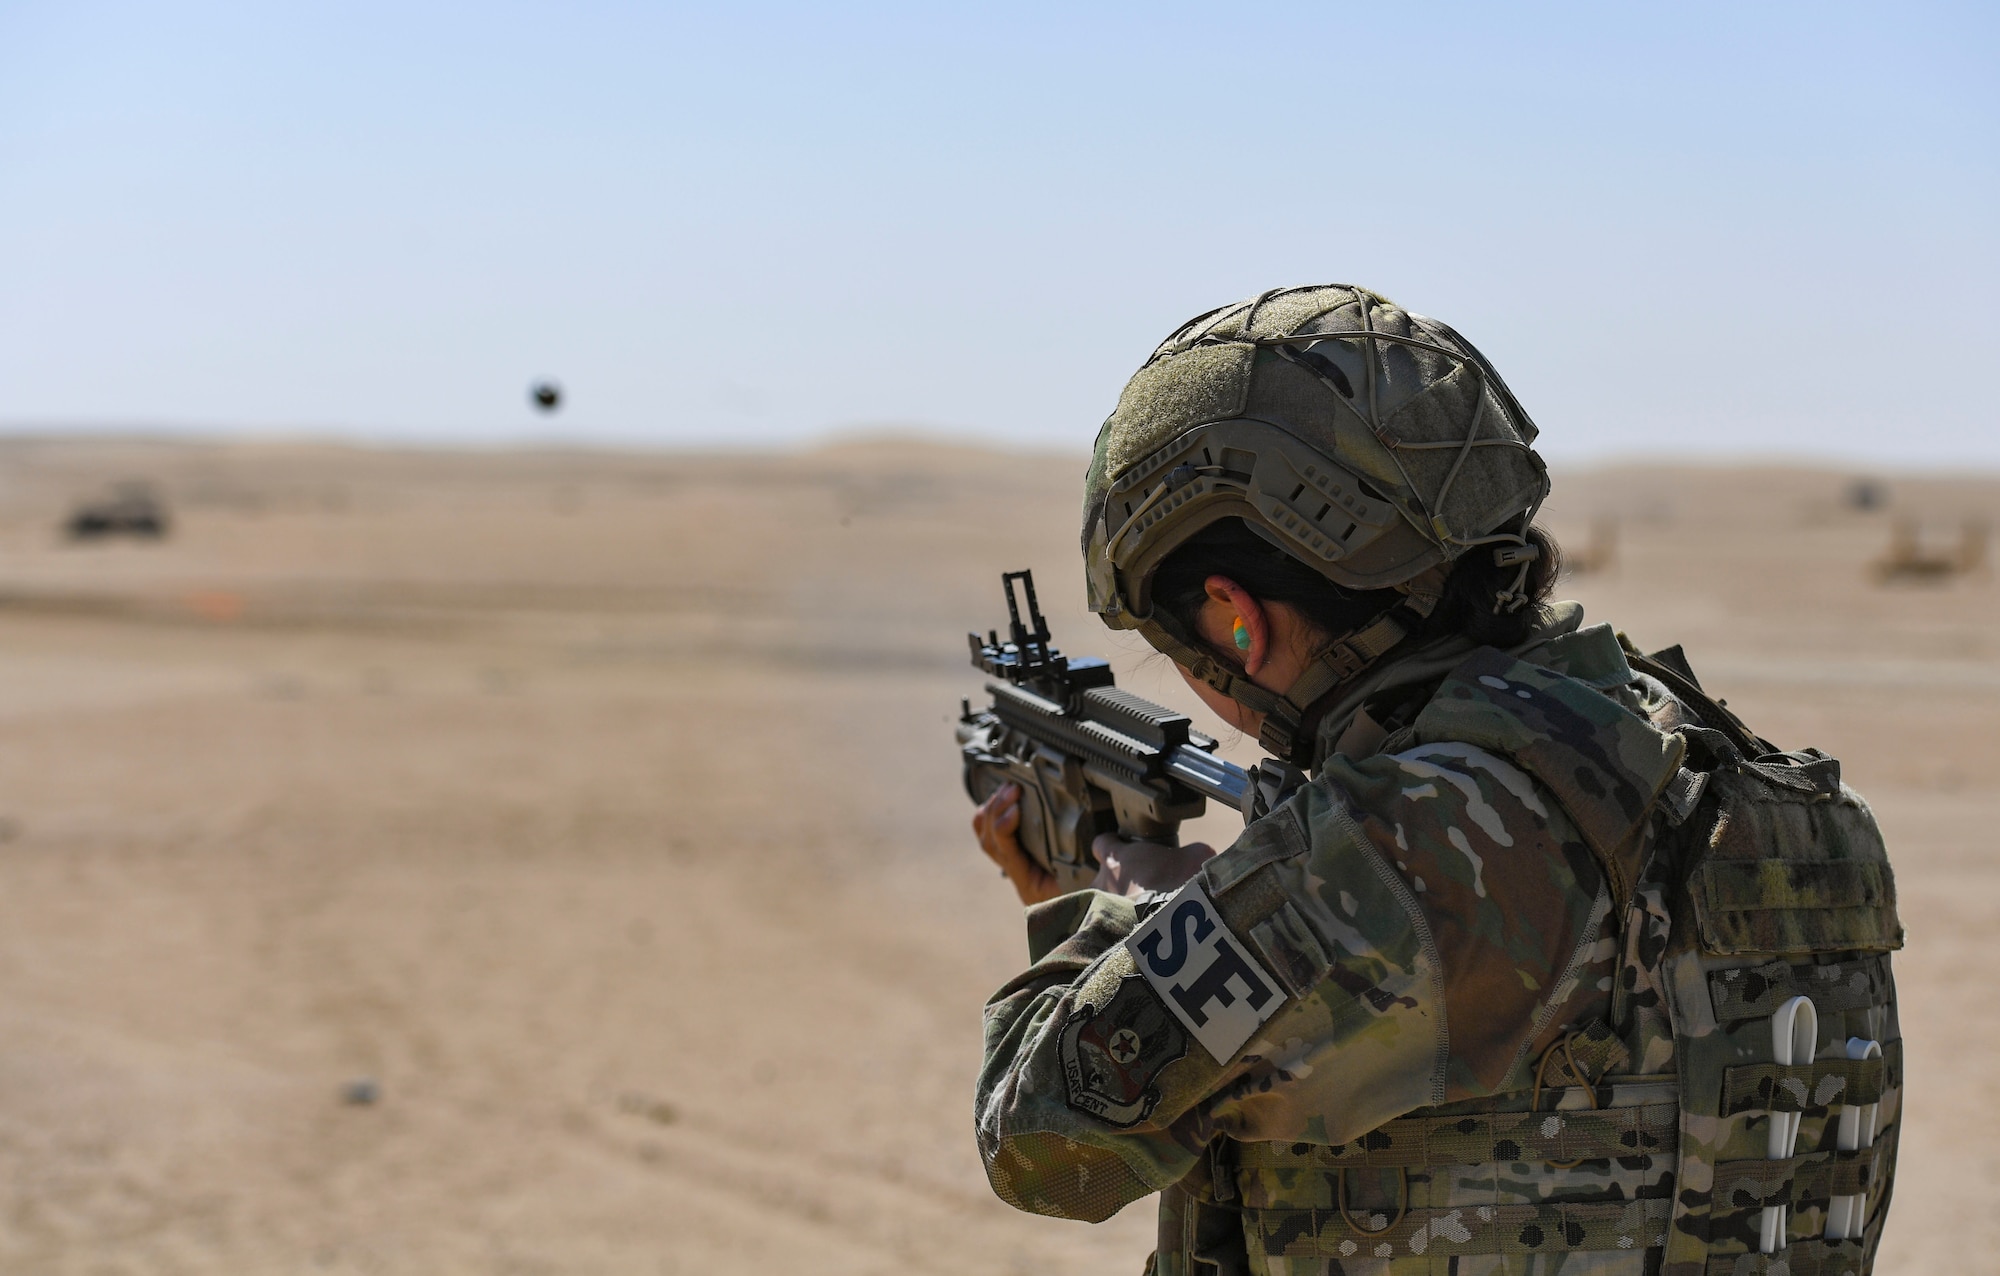 U.S. Air Force Airman 1st Class Miabella Contreras, 386th Expeditionary Security Forces Squadron Operations Raptor Flight response force leader, fires an MK-13 single grenade launcher at the Udairi Range Complex, Kuwait, Oct. 12, 2020.